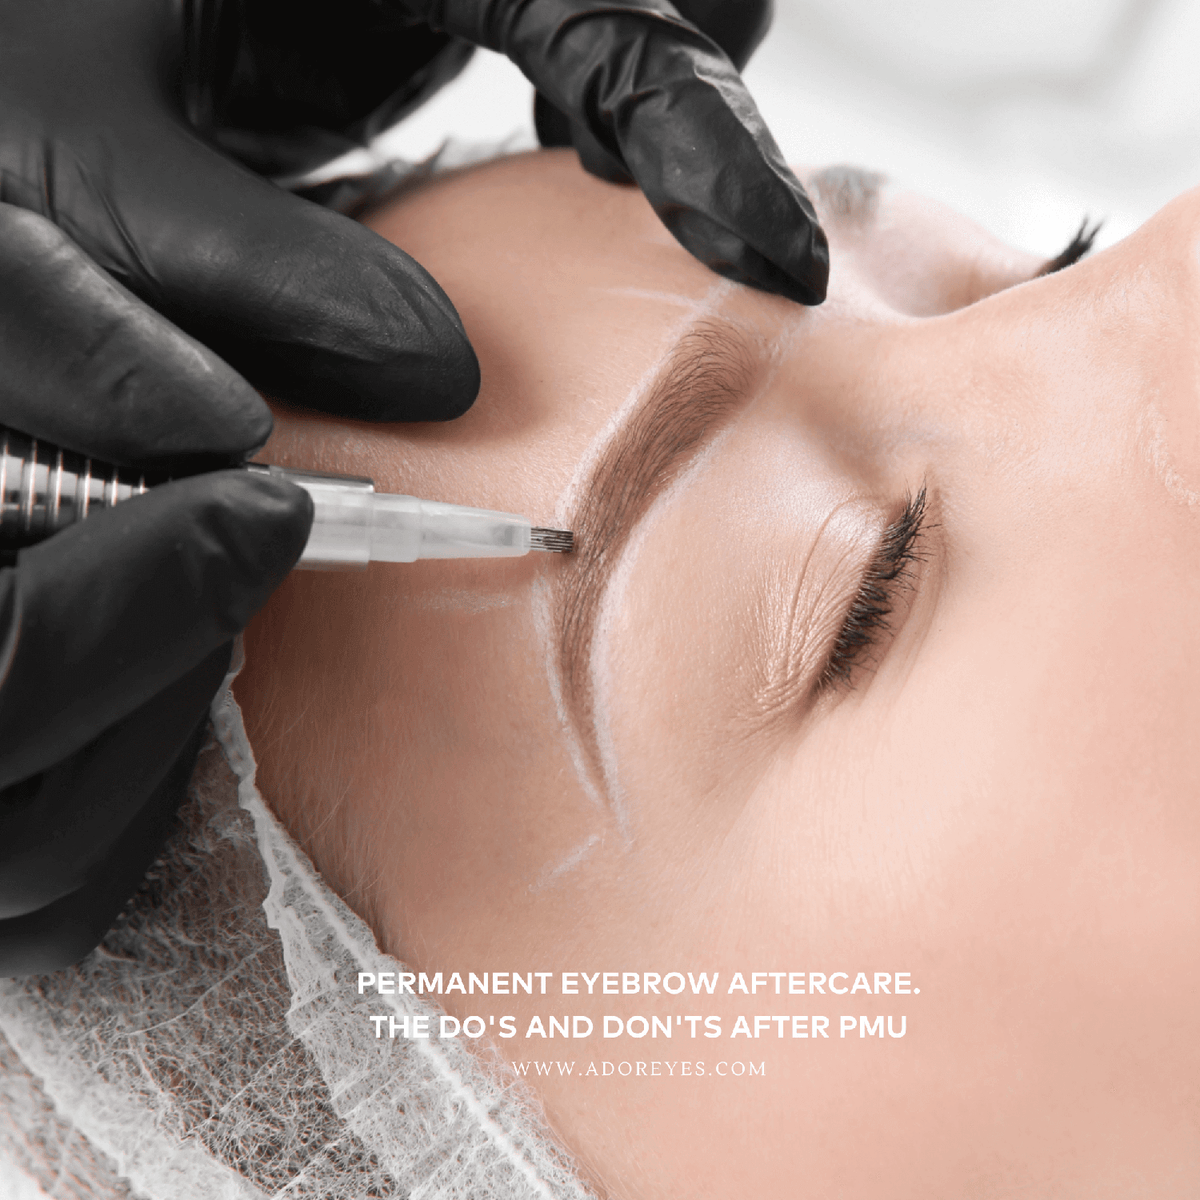 Eyebrow Permanent Makeup Aftercare - The Do's and Don'ts after PMU –  ADOREYES